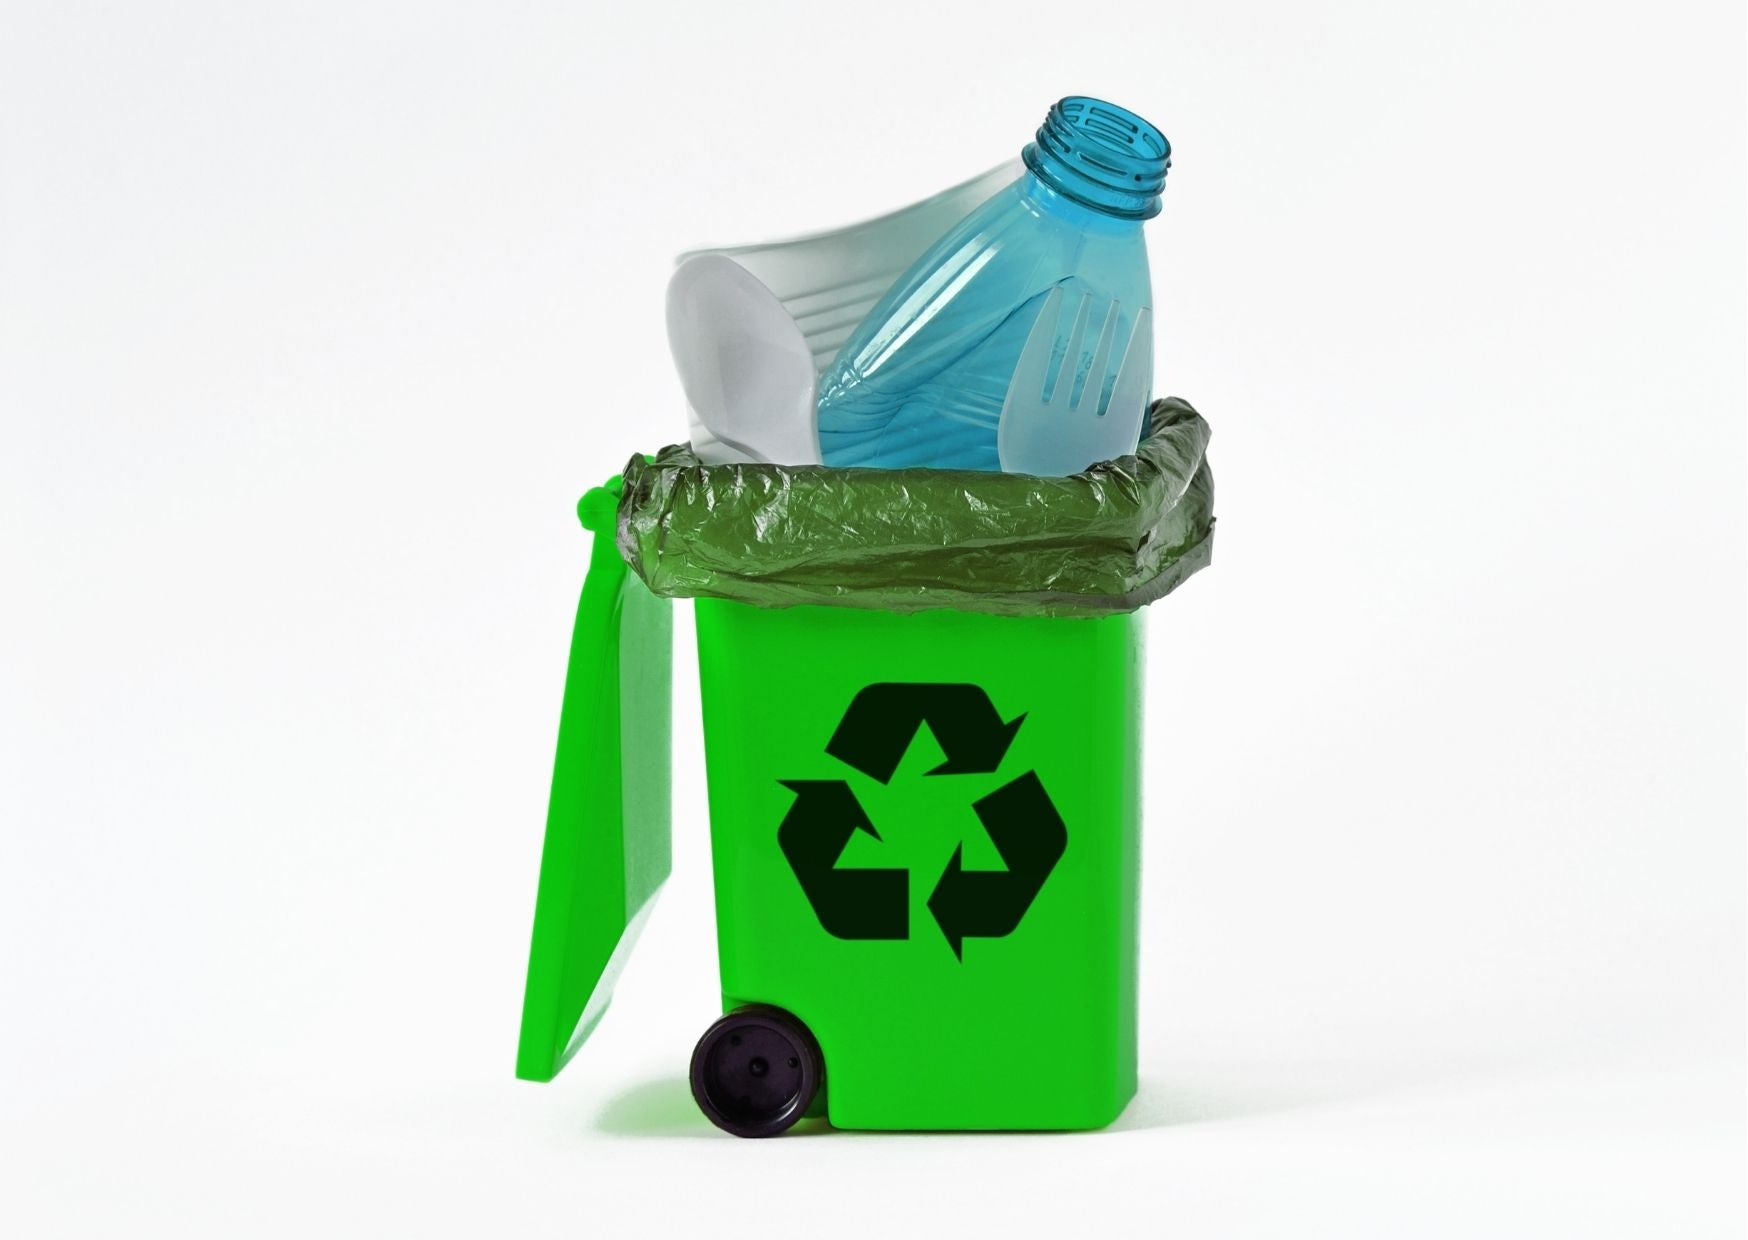 50 Things You Didn’t Know About Plastic (and Recycling) | SR Mailing Ltd